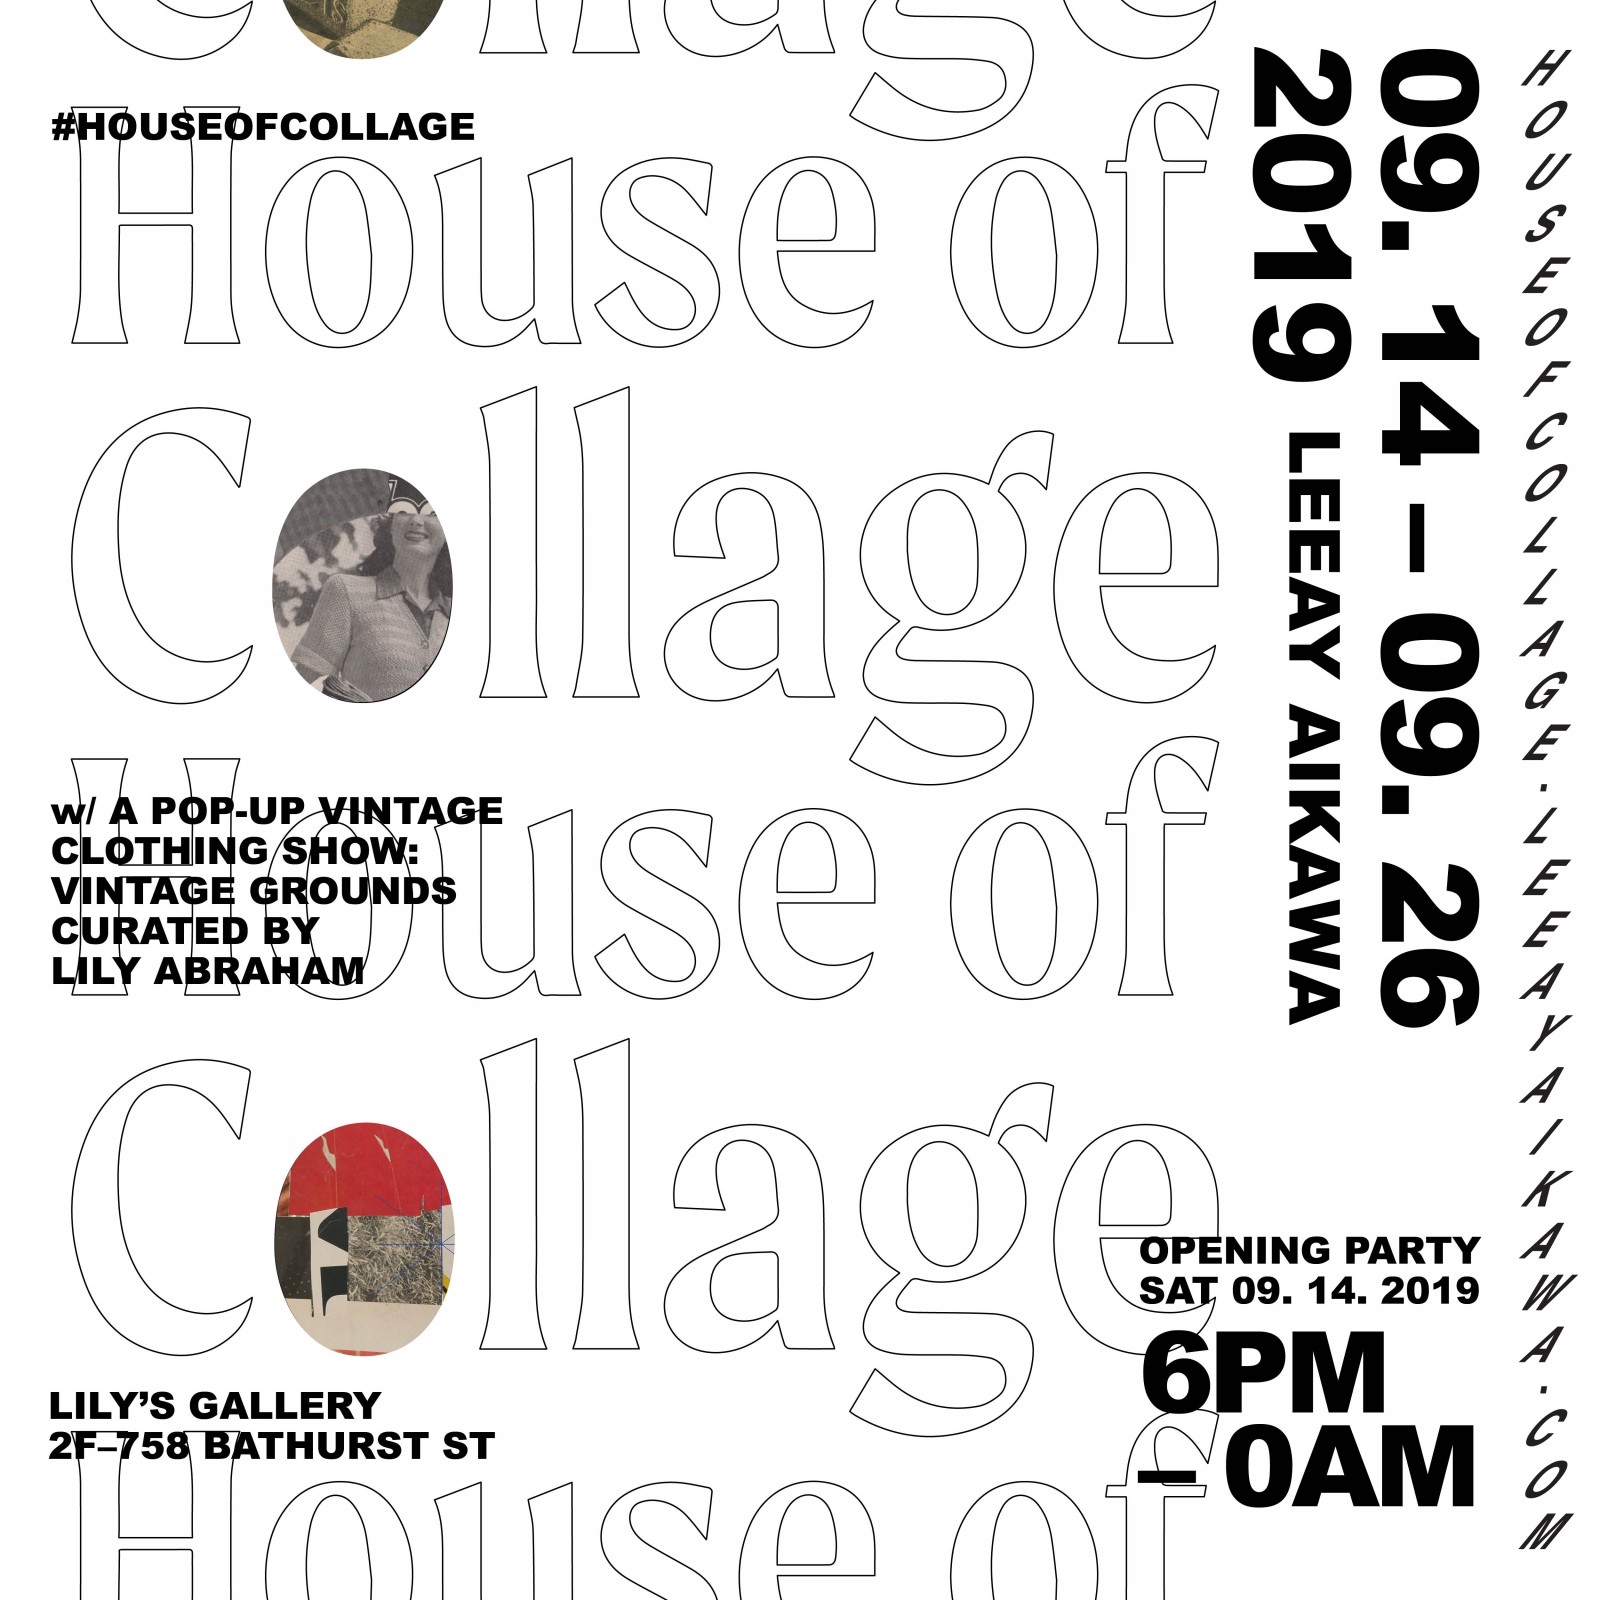 House of Collage Poster